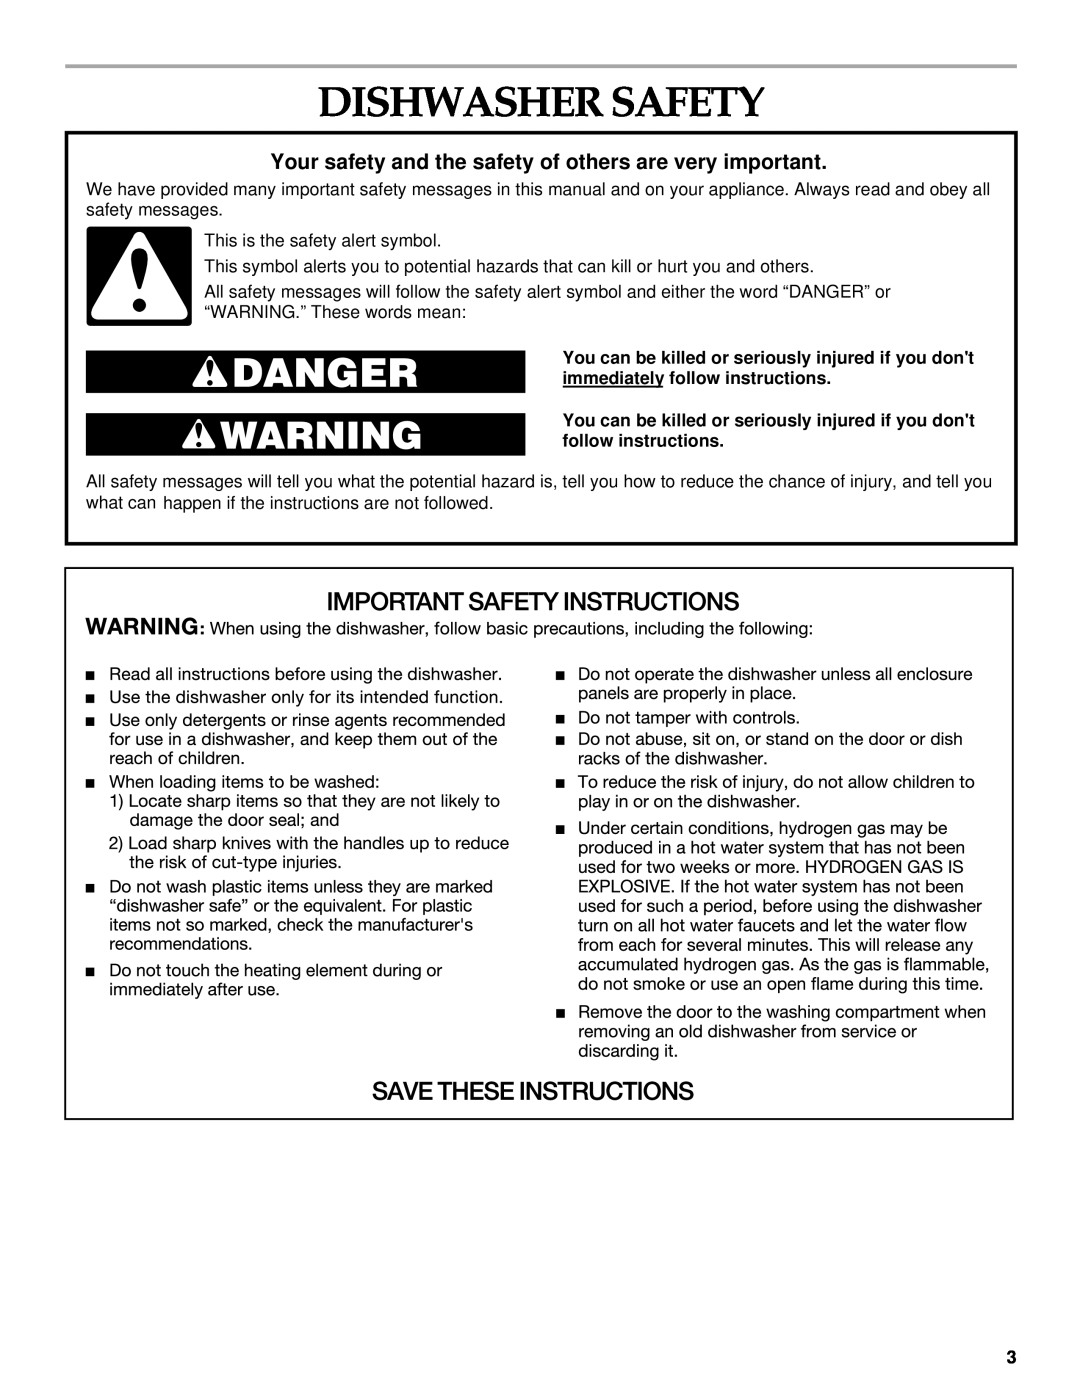 KitchenAid KUDP01TJ manual Dishwasher Safety, Your safety and the safety of others are very important 